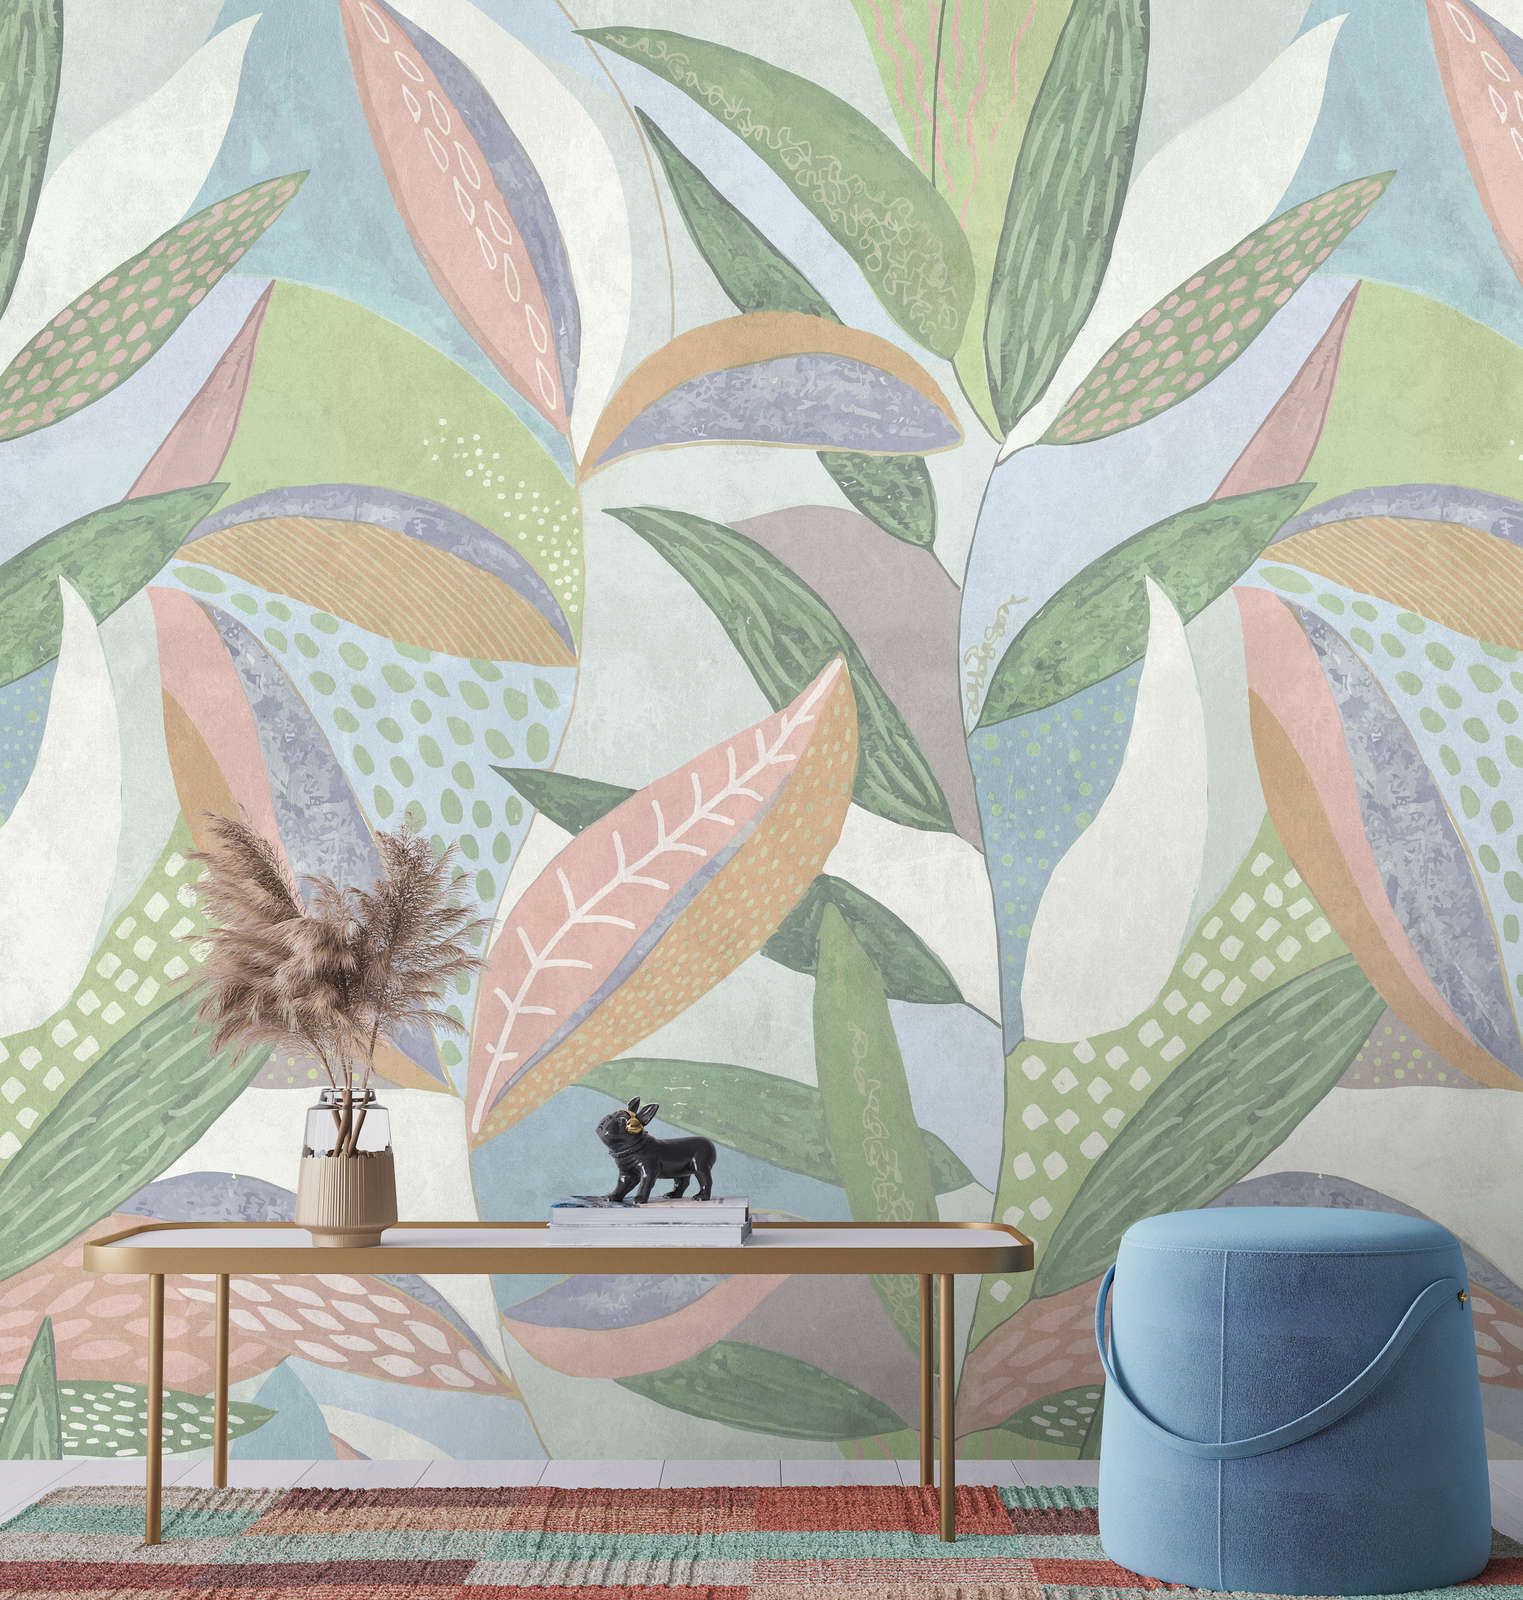             Photo wallpaper »emilia« - Colourful pastel leaf pattern in front of concrete plaster structure - green, blue, pink | matt, smooth non-woven
        